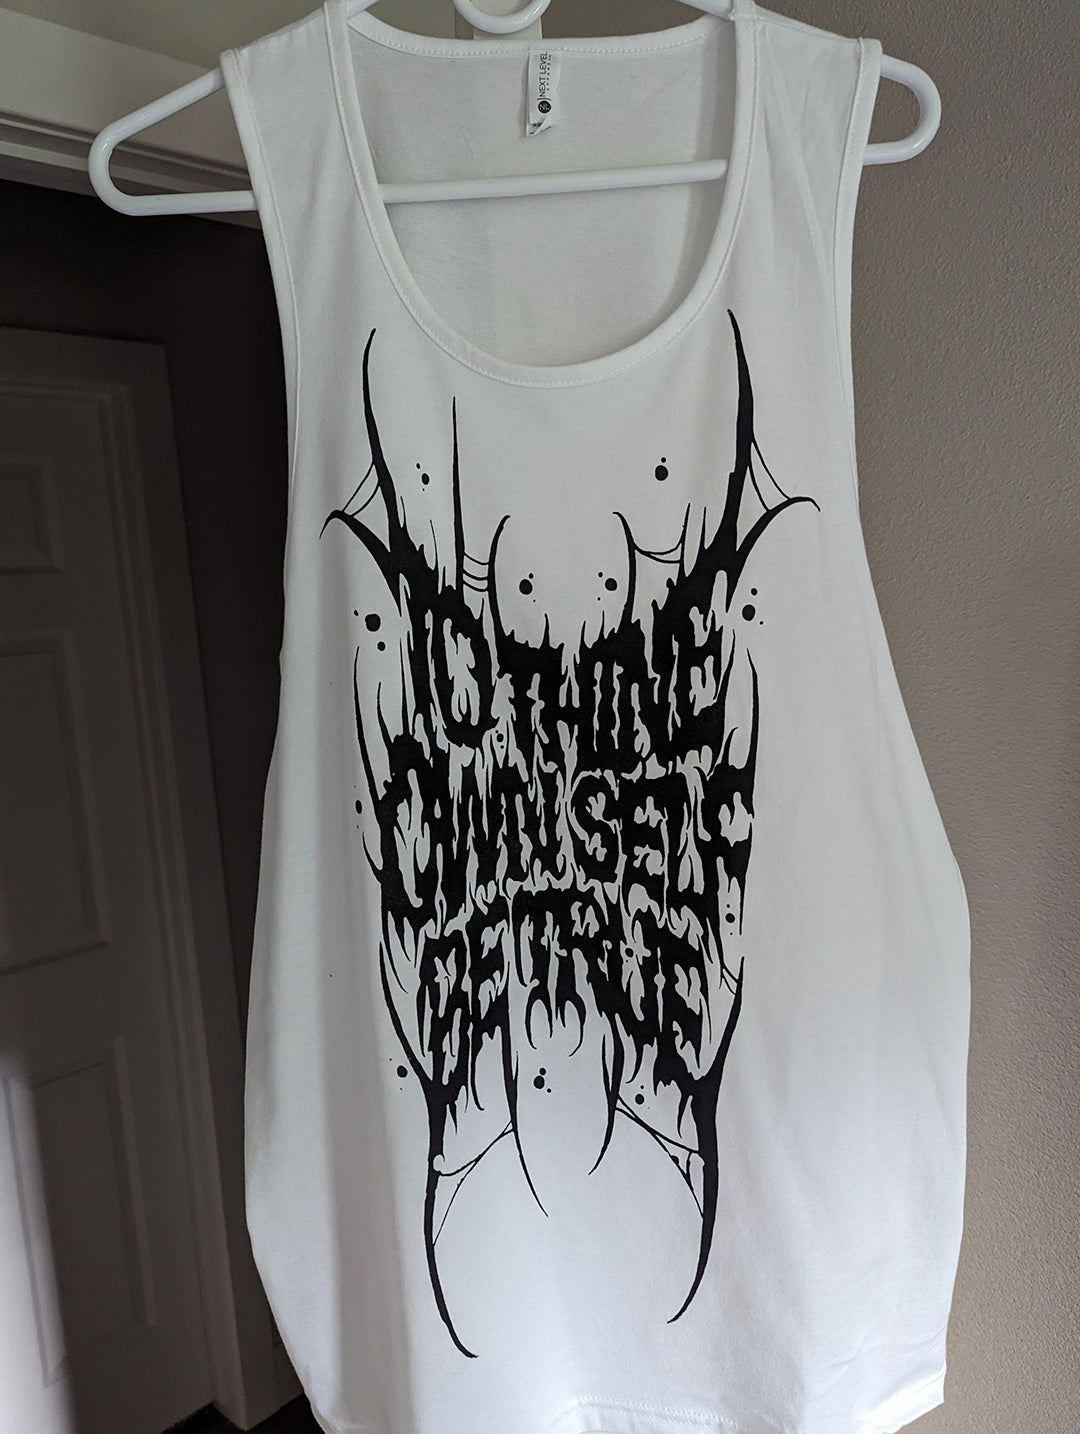 Blackletter Art "To Thine Own Self Be True" Cotton Tank